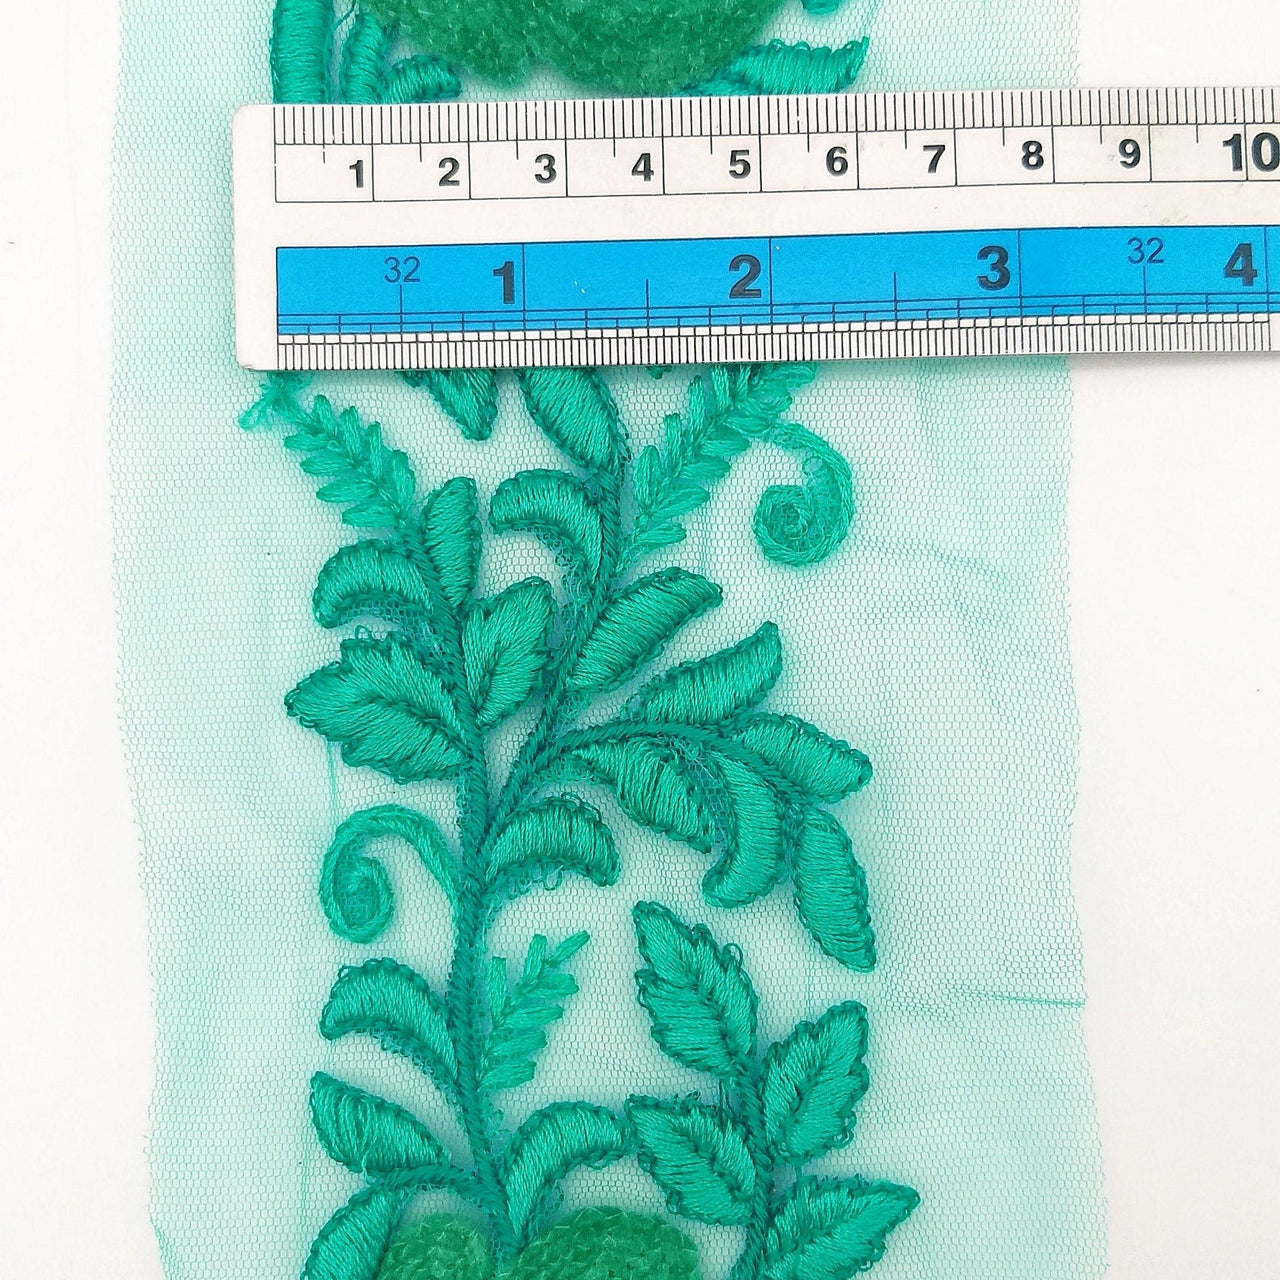 Cyan Green Soft Net Fabric Lace Trim with Floral Embroidery, Lace Trim, Sari Border